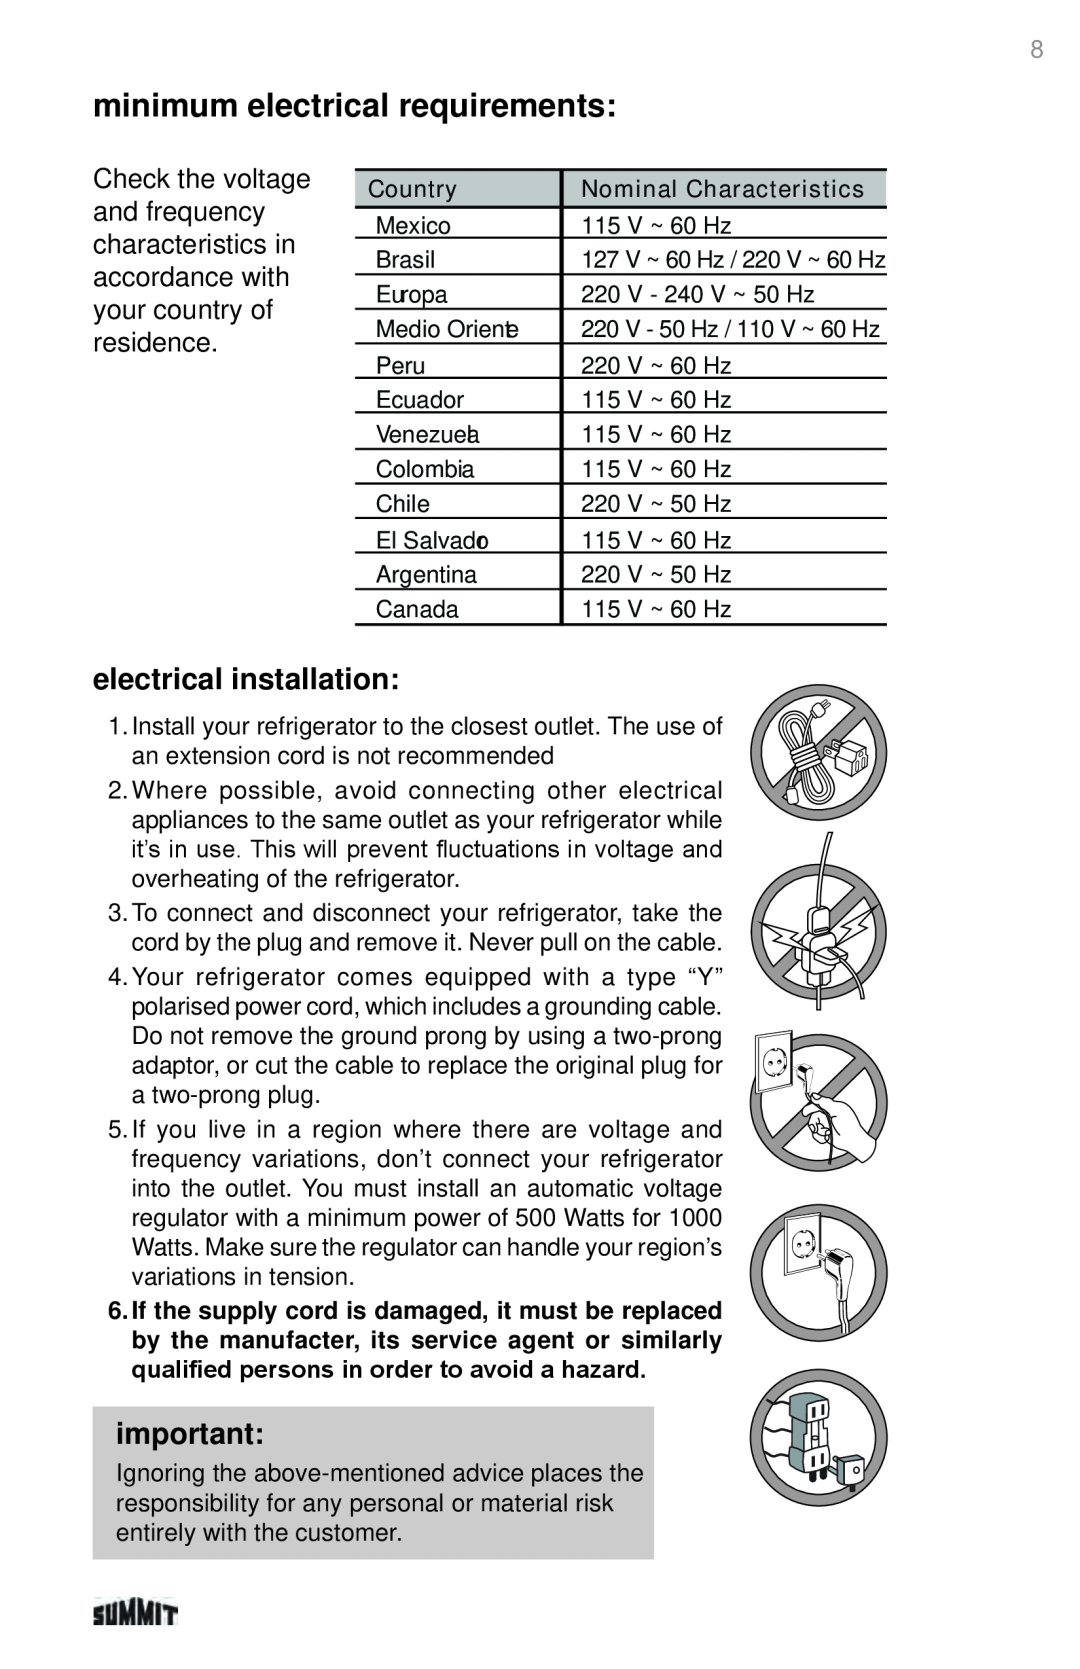 Summit 225D6783P011 manual minimum electrical requirements, electrical installation, Country, Nominal Characteristics 